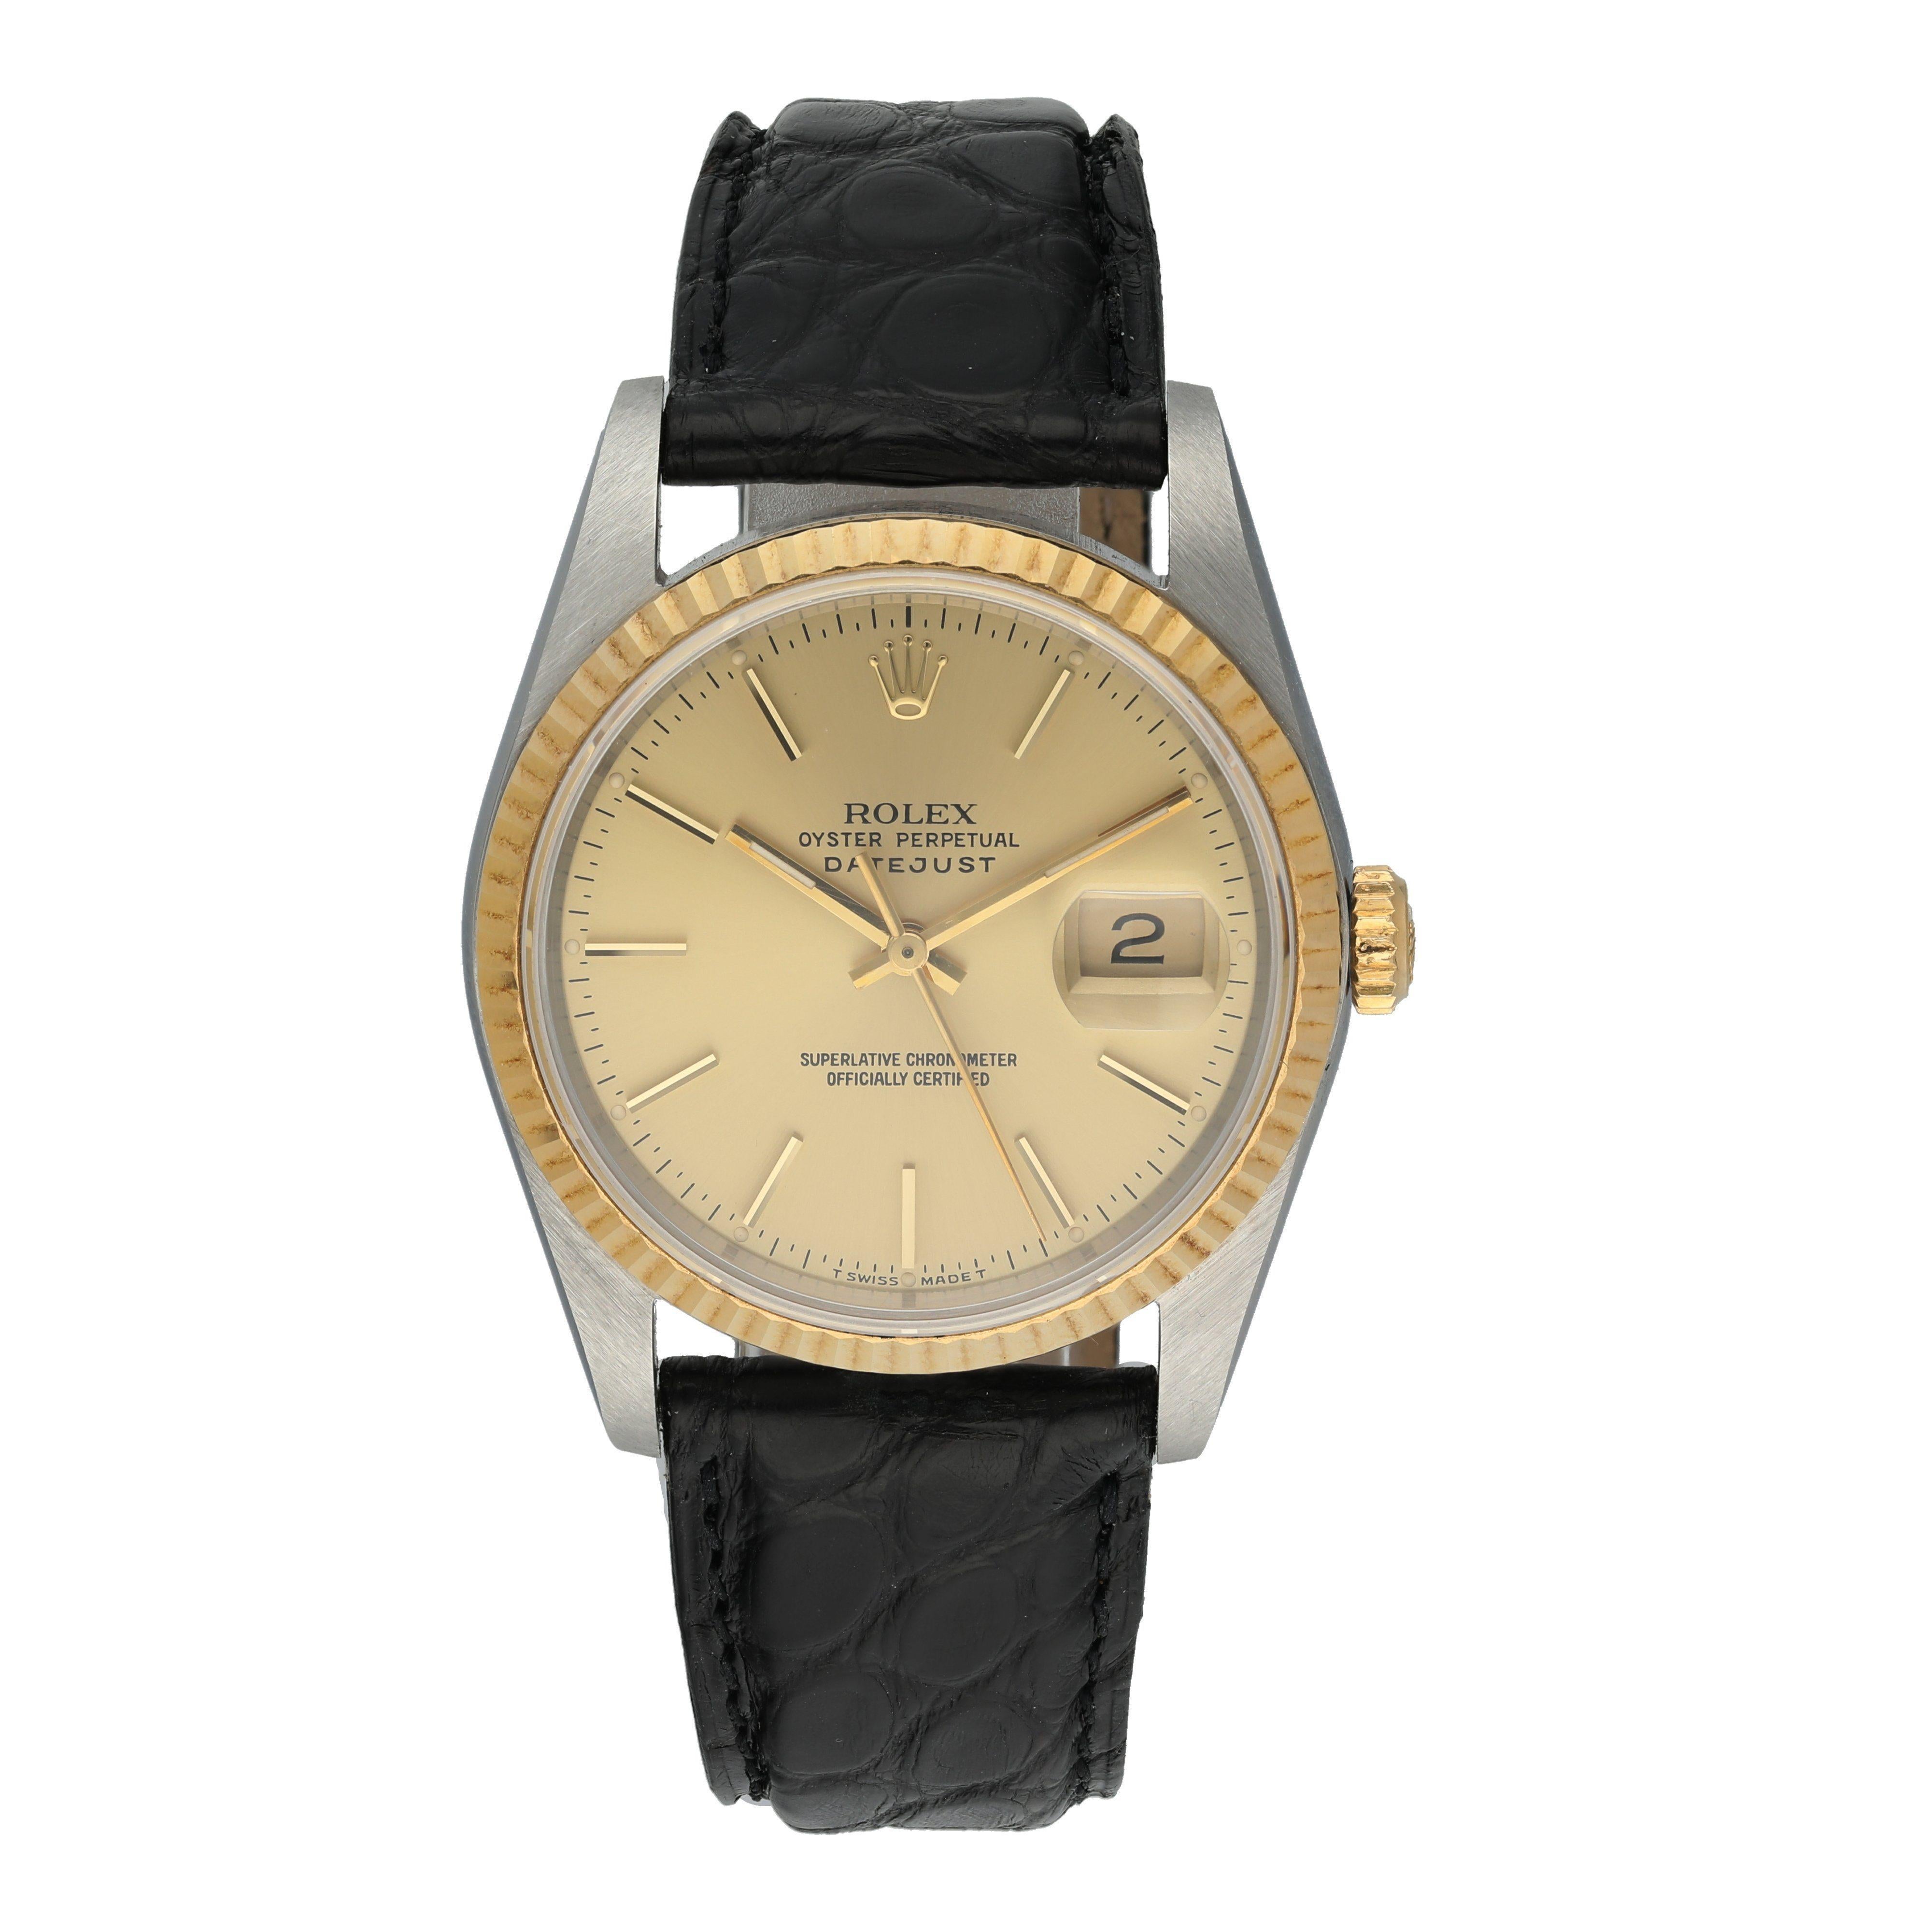 Rolex Datejust 16233 Men Watch. 
36mm Stainless Steel case. 
Fluted-gold bezel
Champagne dial with gold hands and index hour markers. 
Minute markers on the outer dial. 
Date display at the 3 o'clock position. 
Leather Strap with Buckle. 
Will fit